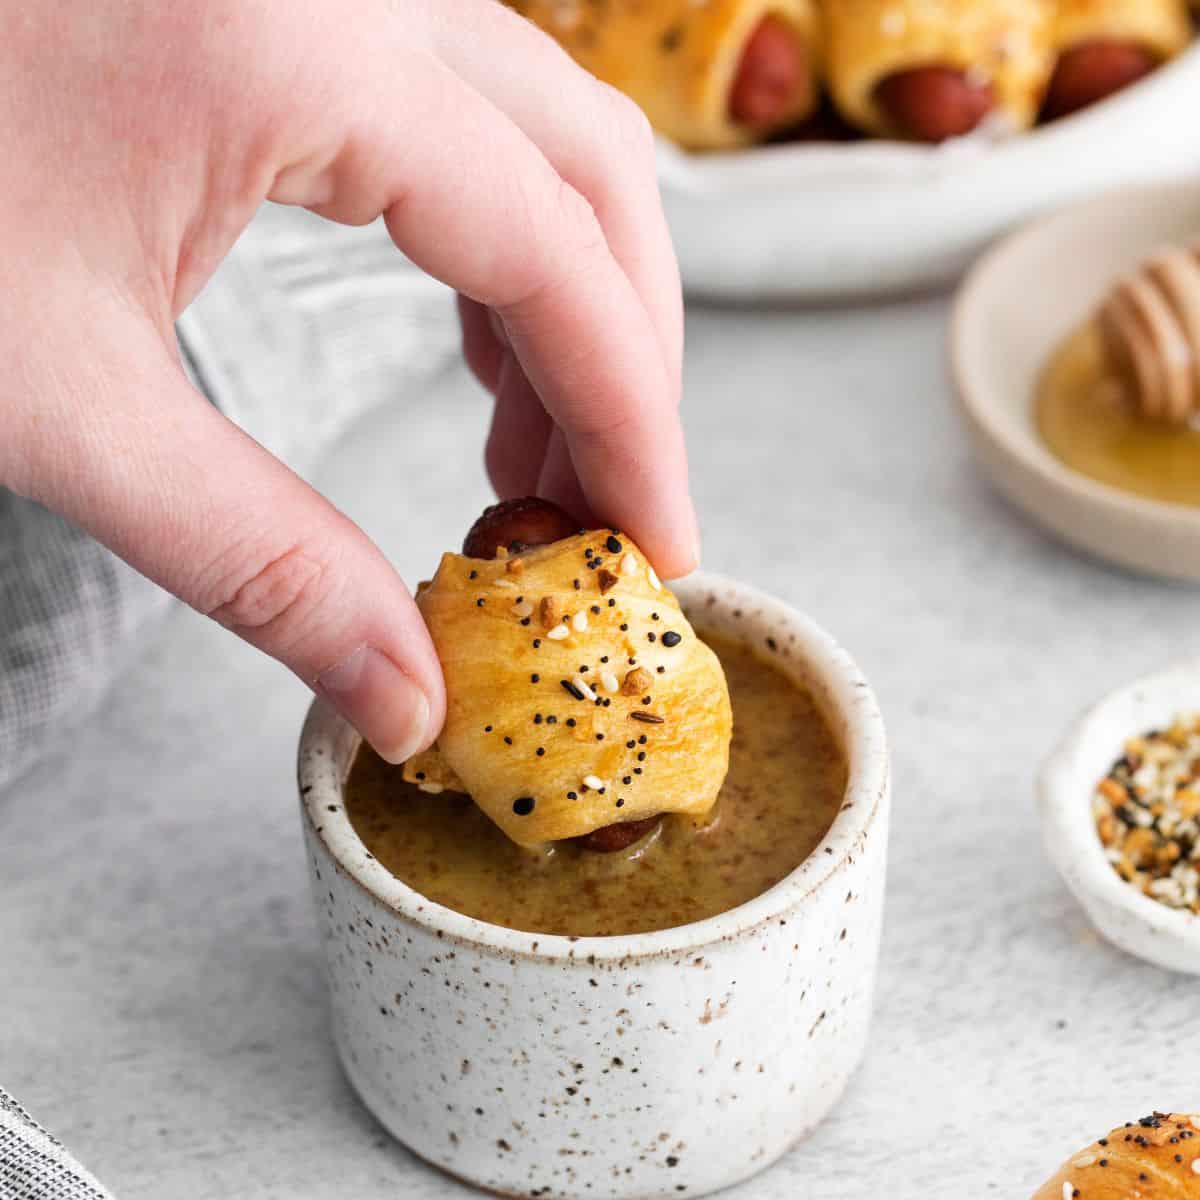 4 Ingredient Everything Bagel Pigs in a Blanket, a simple and delicious appetizer or snack recipe seasoned with everything bagel seasoning.